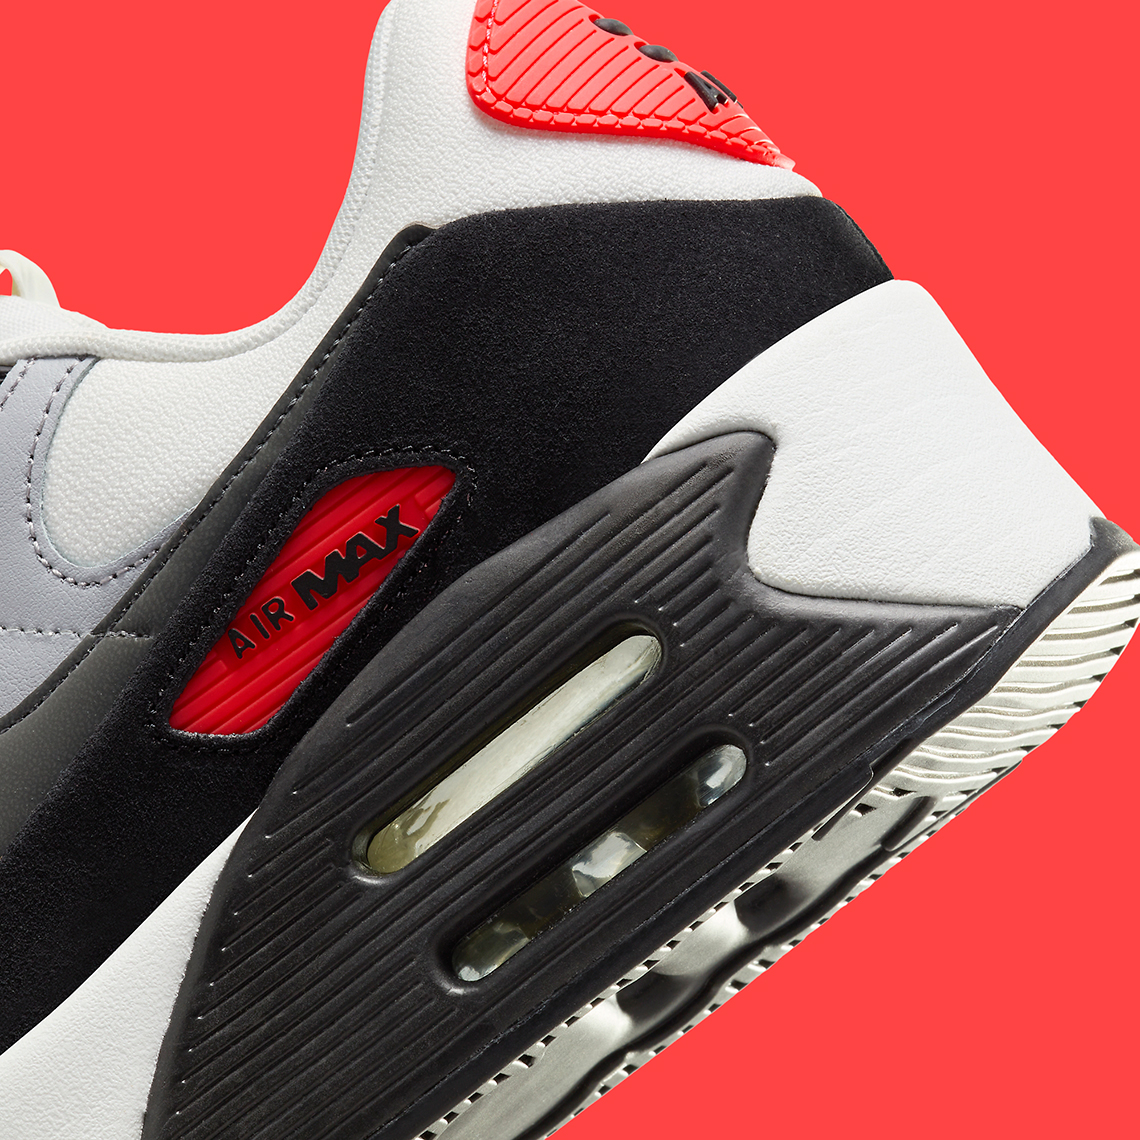 Nike's Stacked Air Max 90 